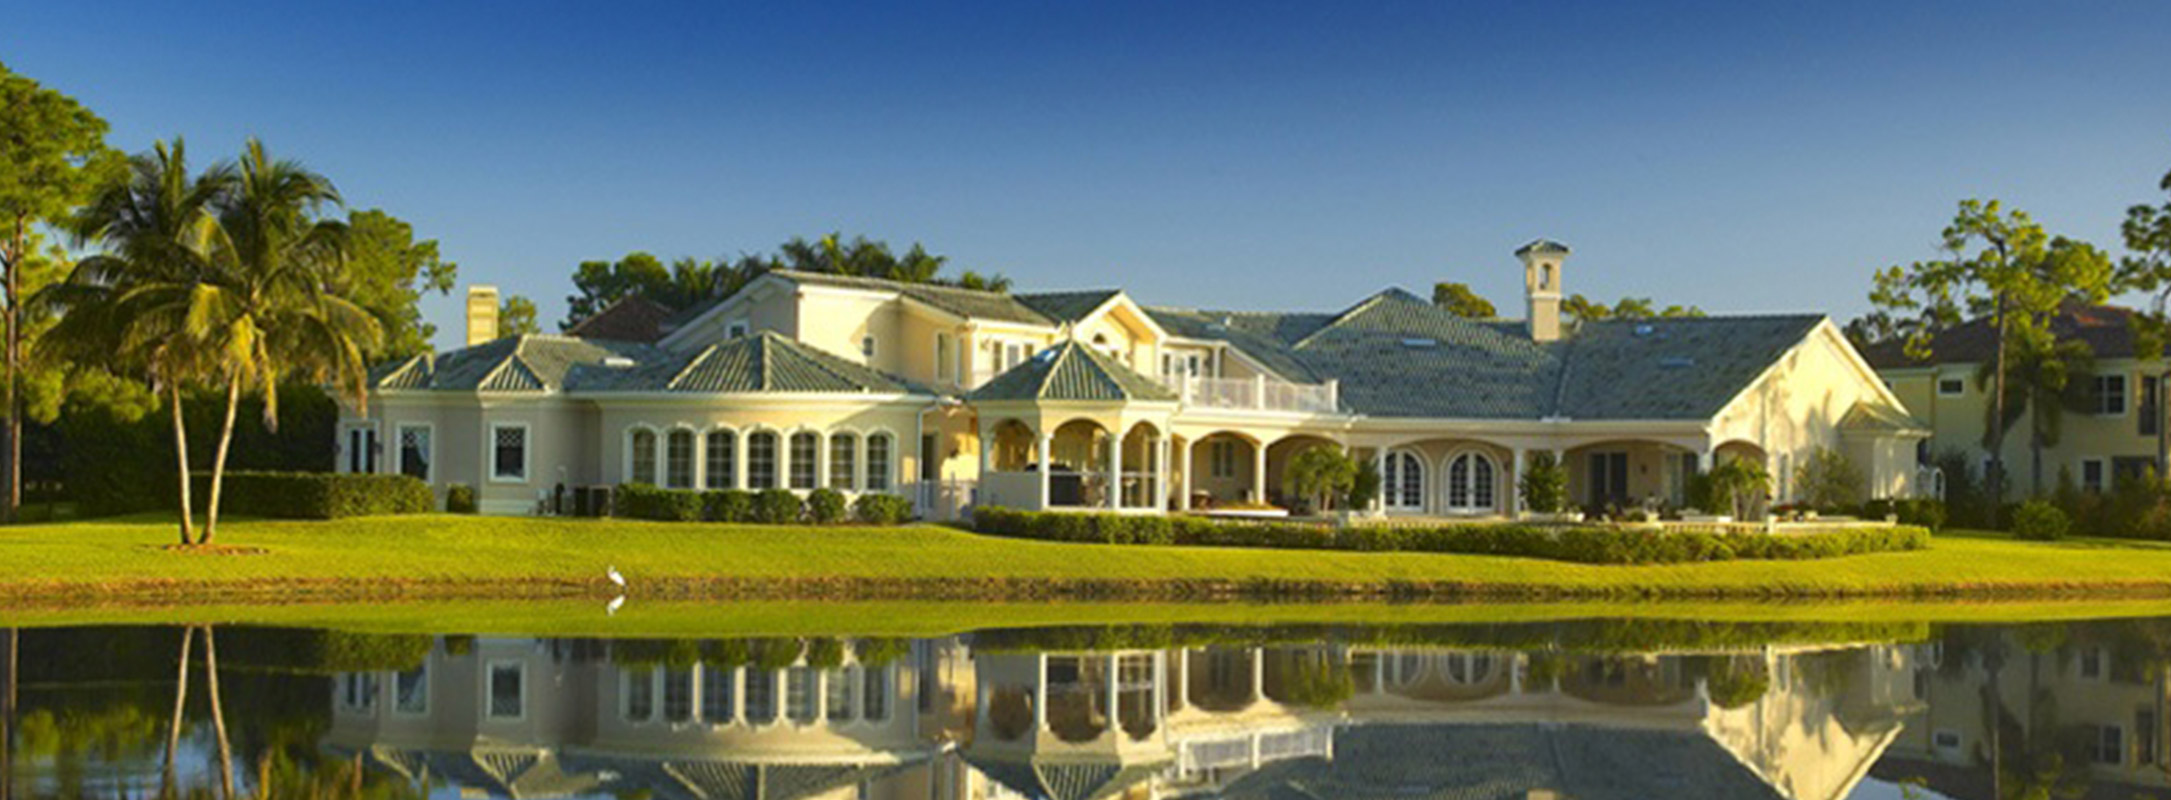 Fiddlesticks Country Club, Fort Myers